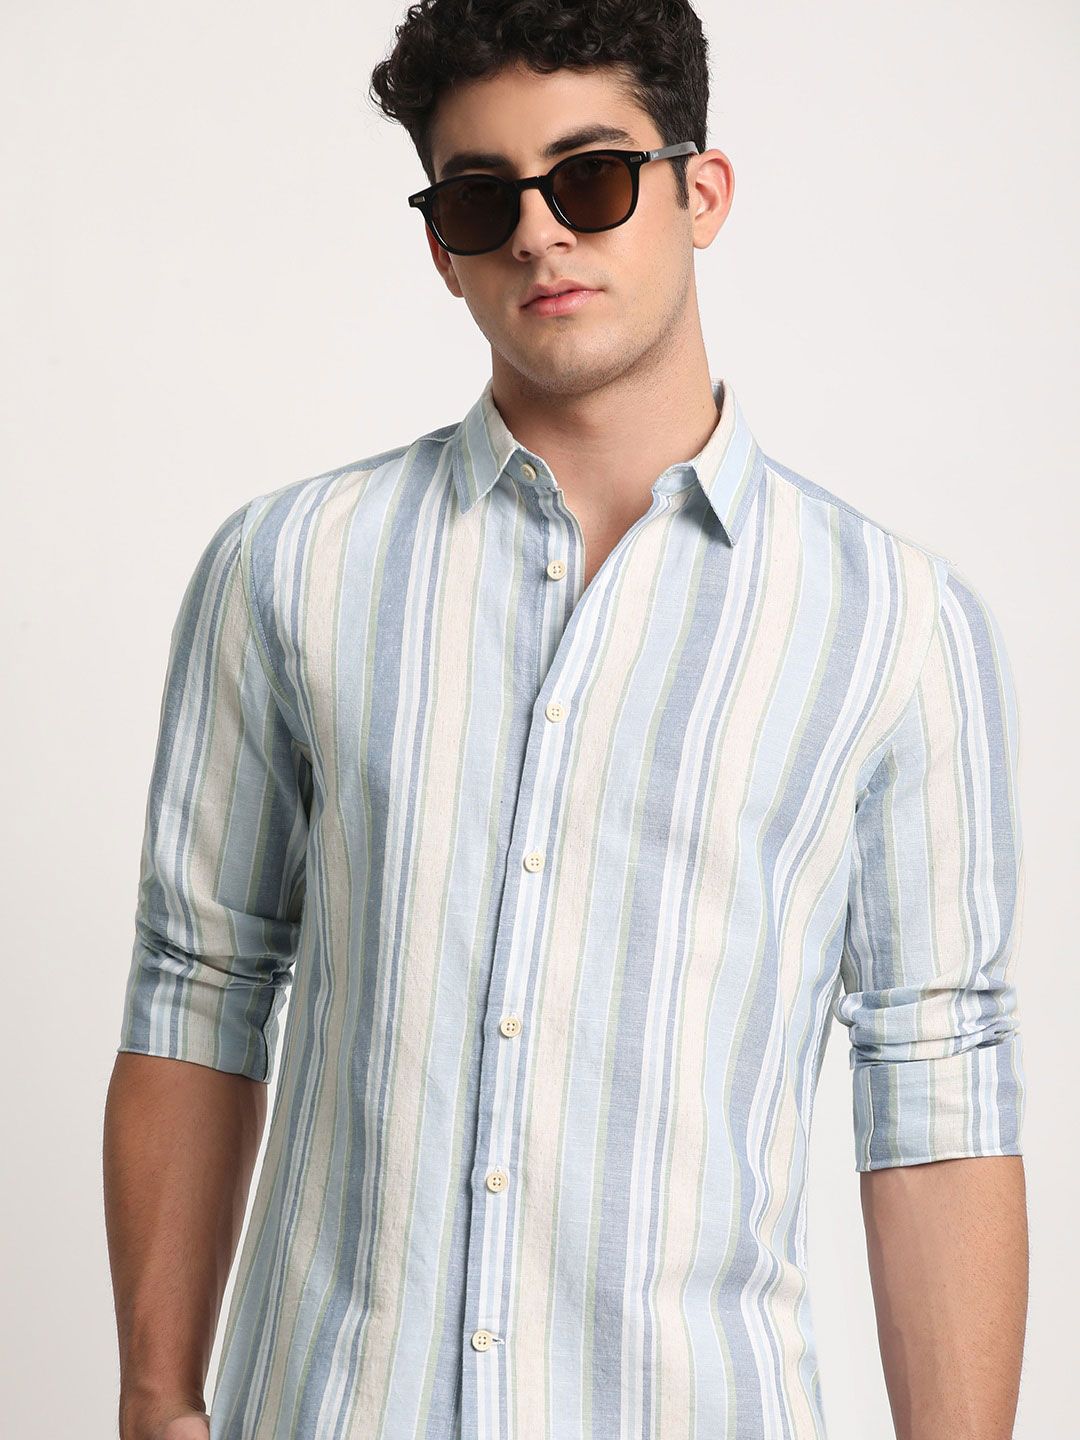 THE BEAR HOUSE Men Striped Slim Fit Spread Collar Casual Shirts